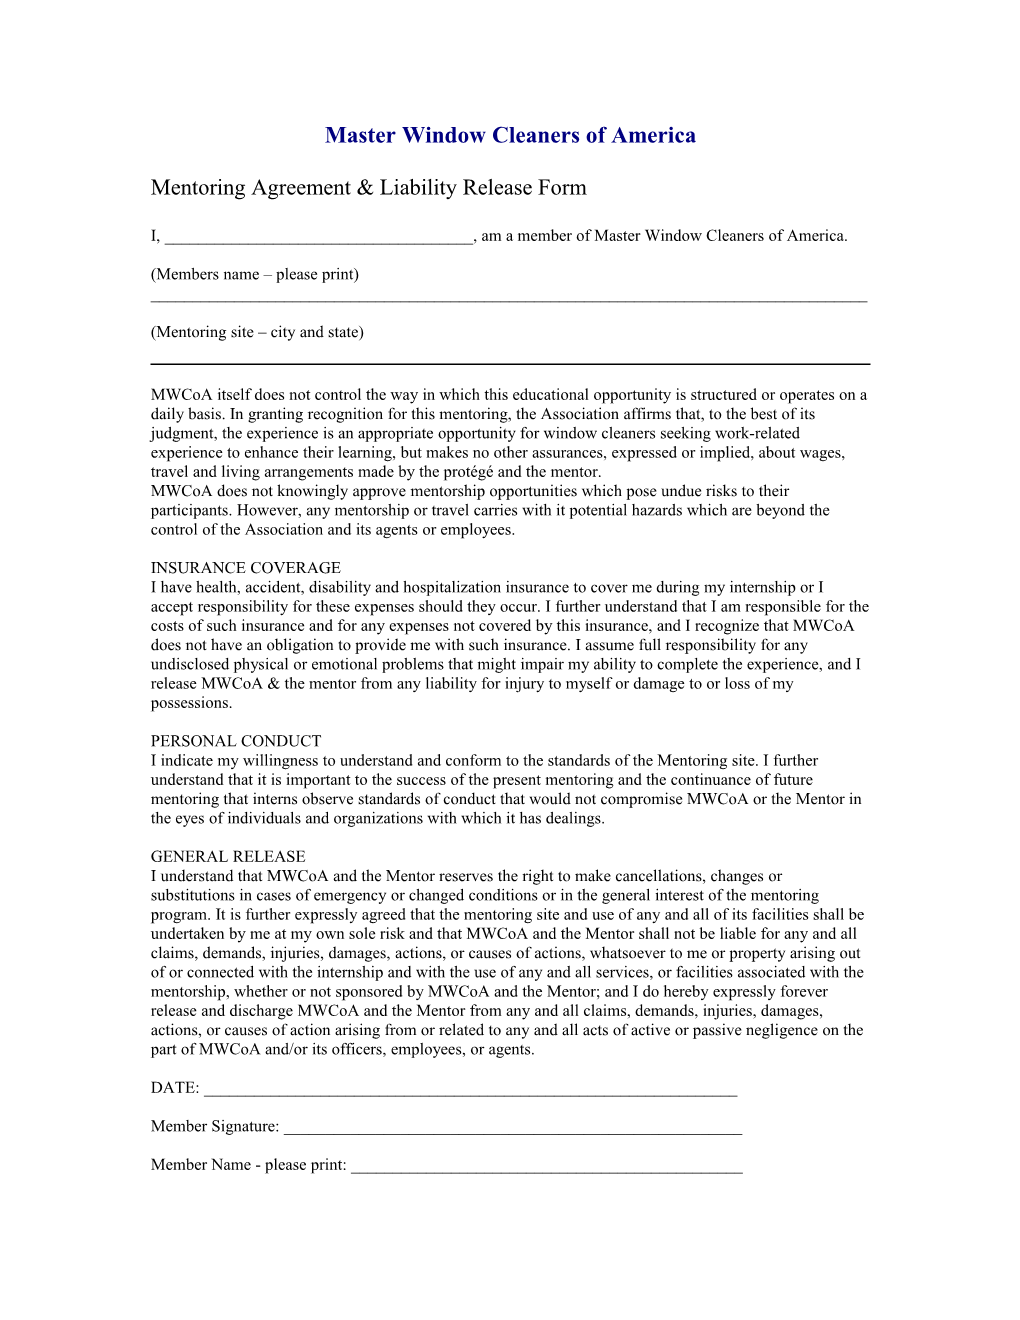 Mentoring Agreement & Liability Release Form